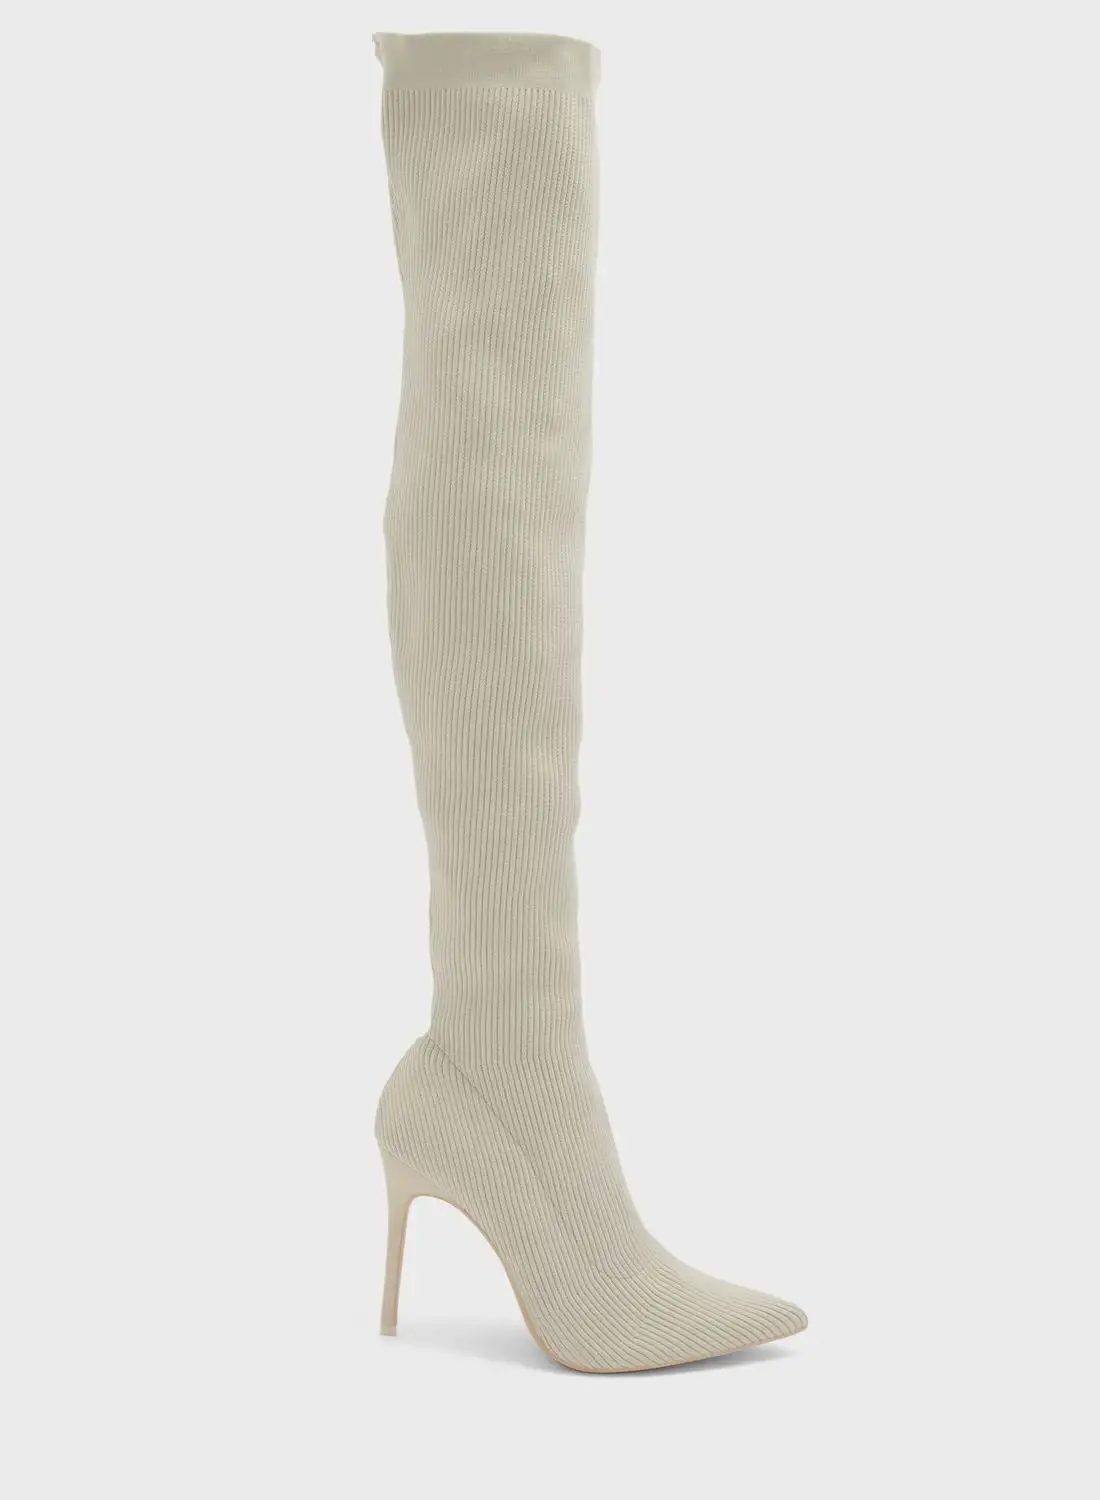 PUBLIC DESIRE Chateau Knee High Boot